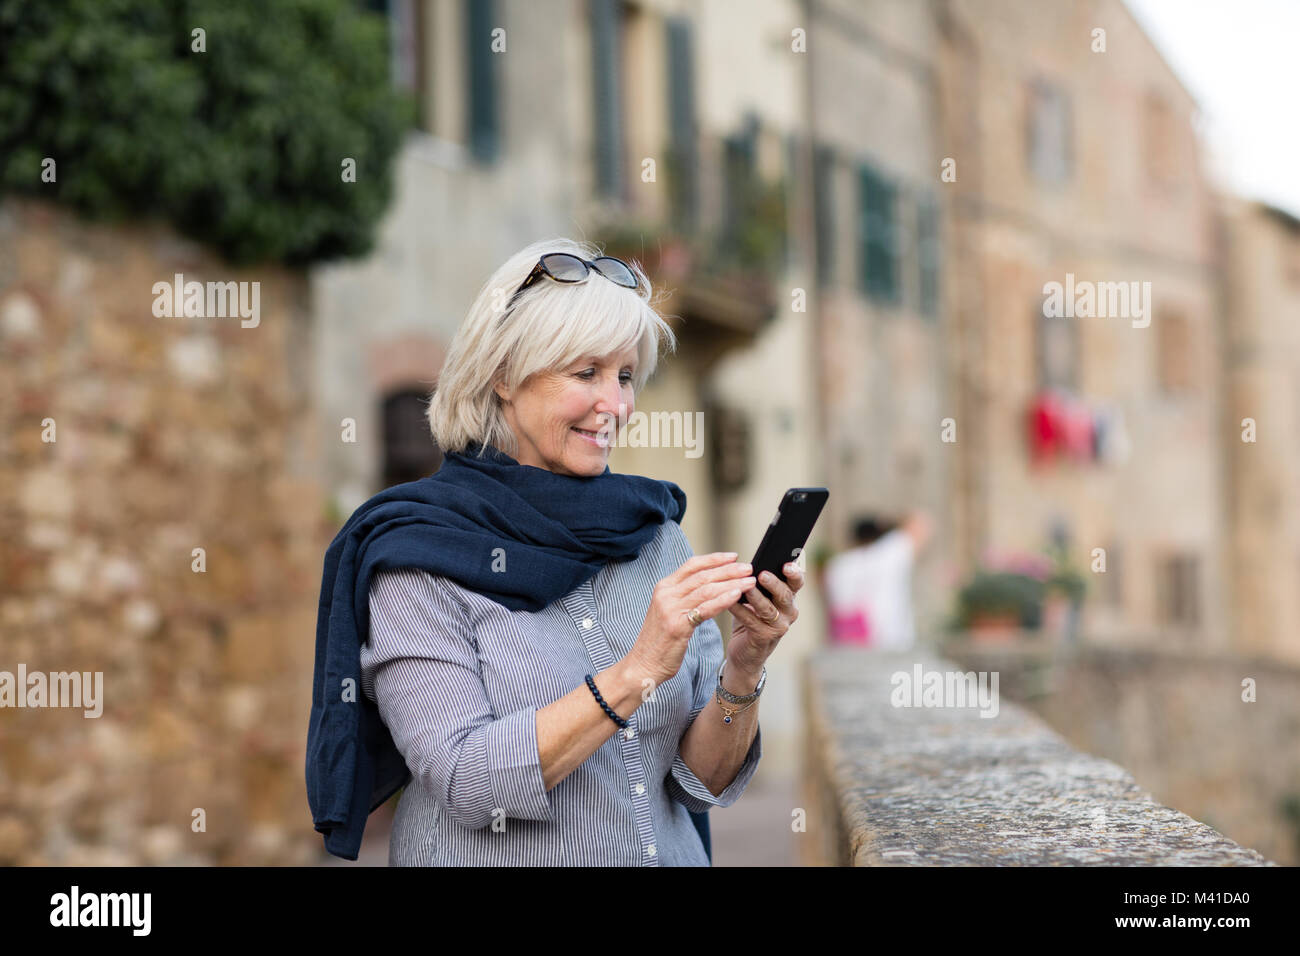 Senior woman on vacation using a smartphone Stock Photo